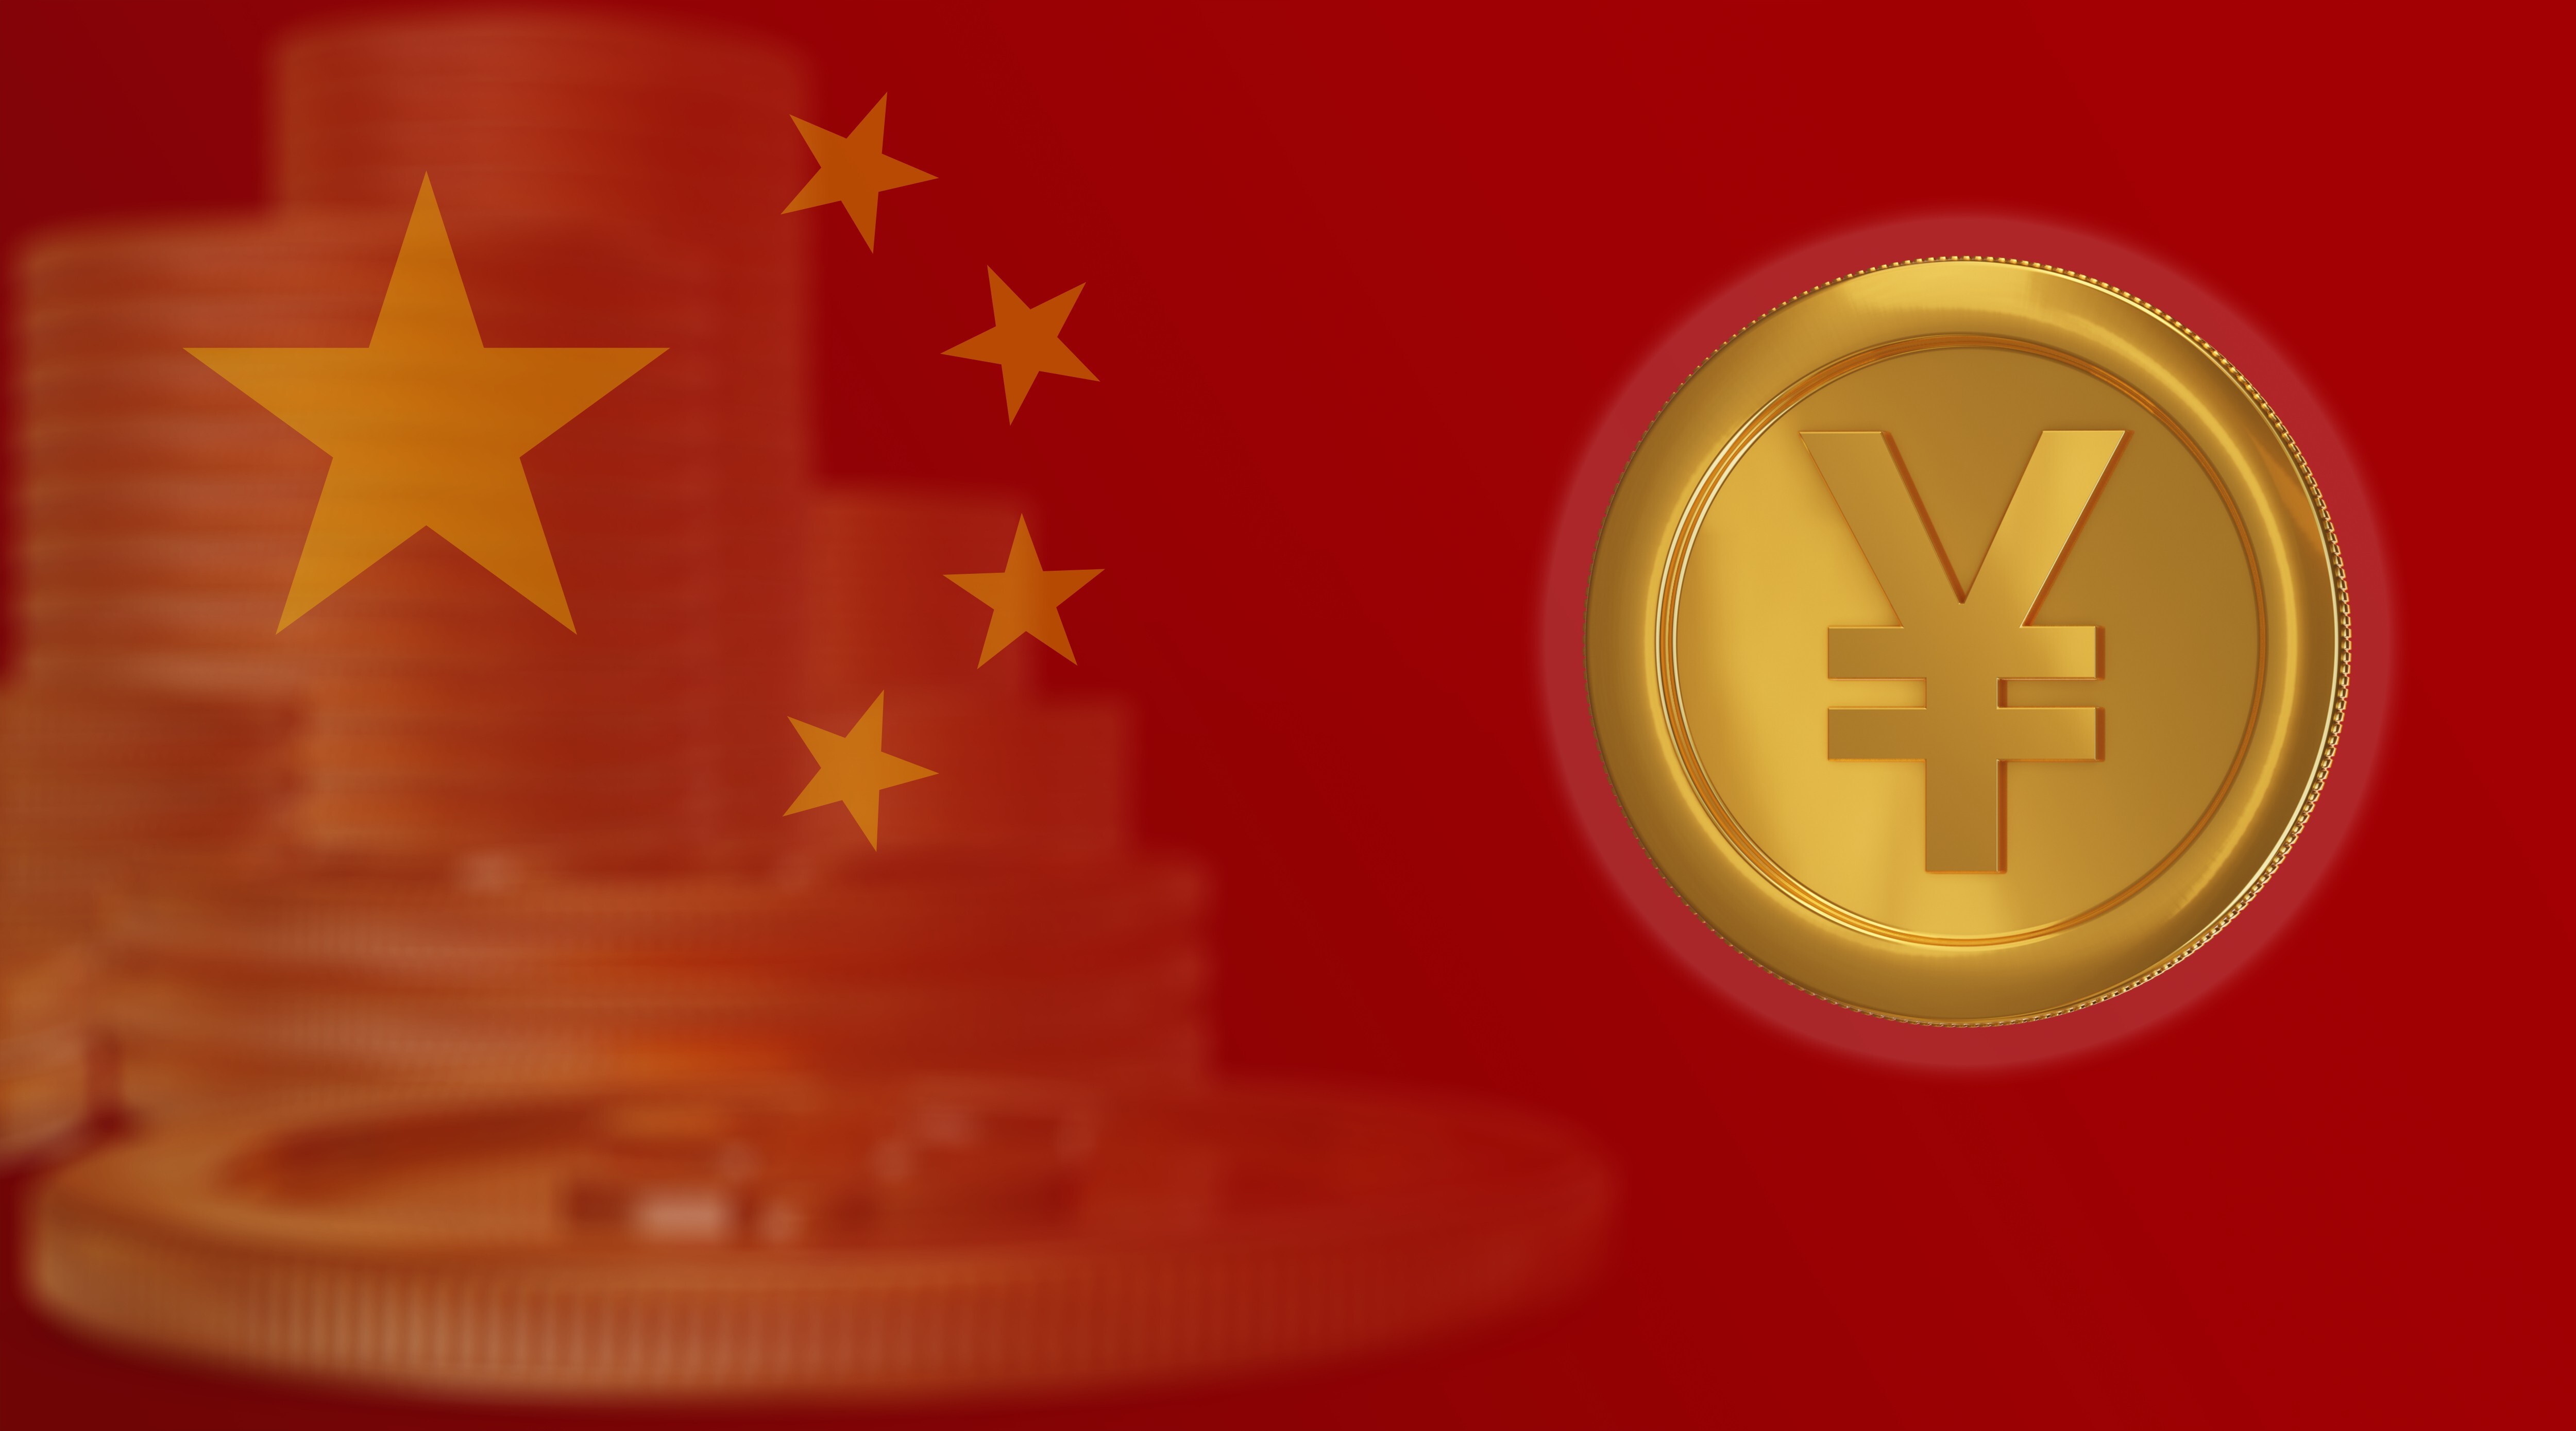 China’s national digital currency (DCEP) Photo: Shutterstock